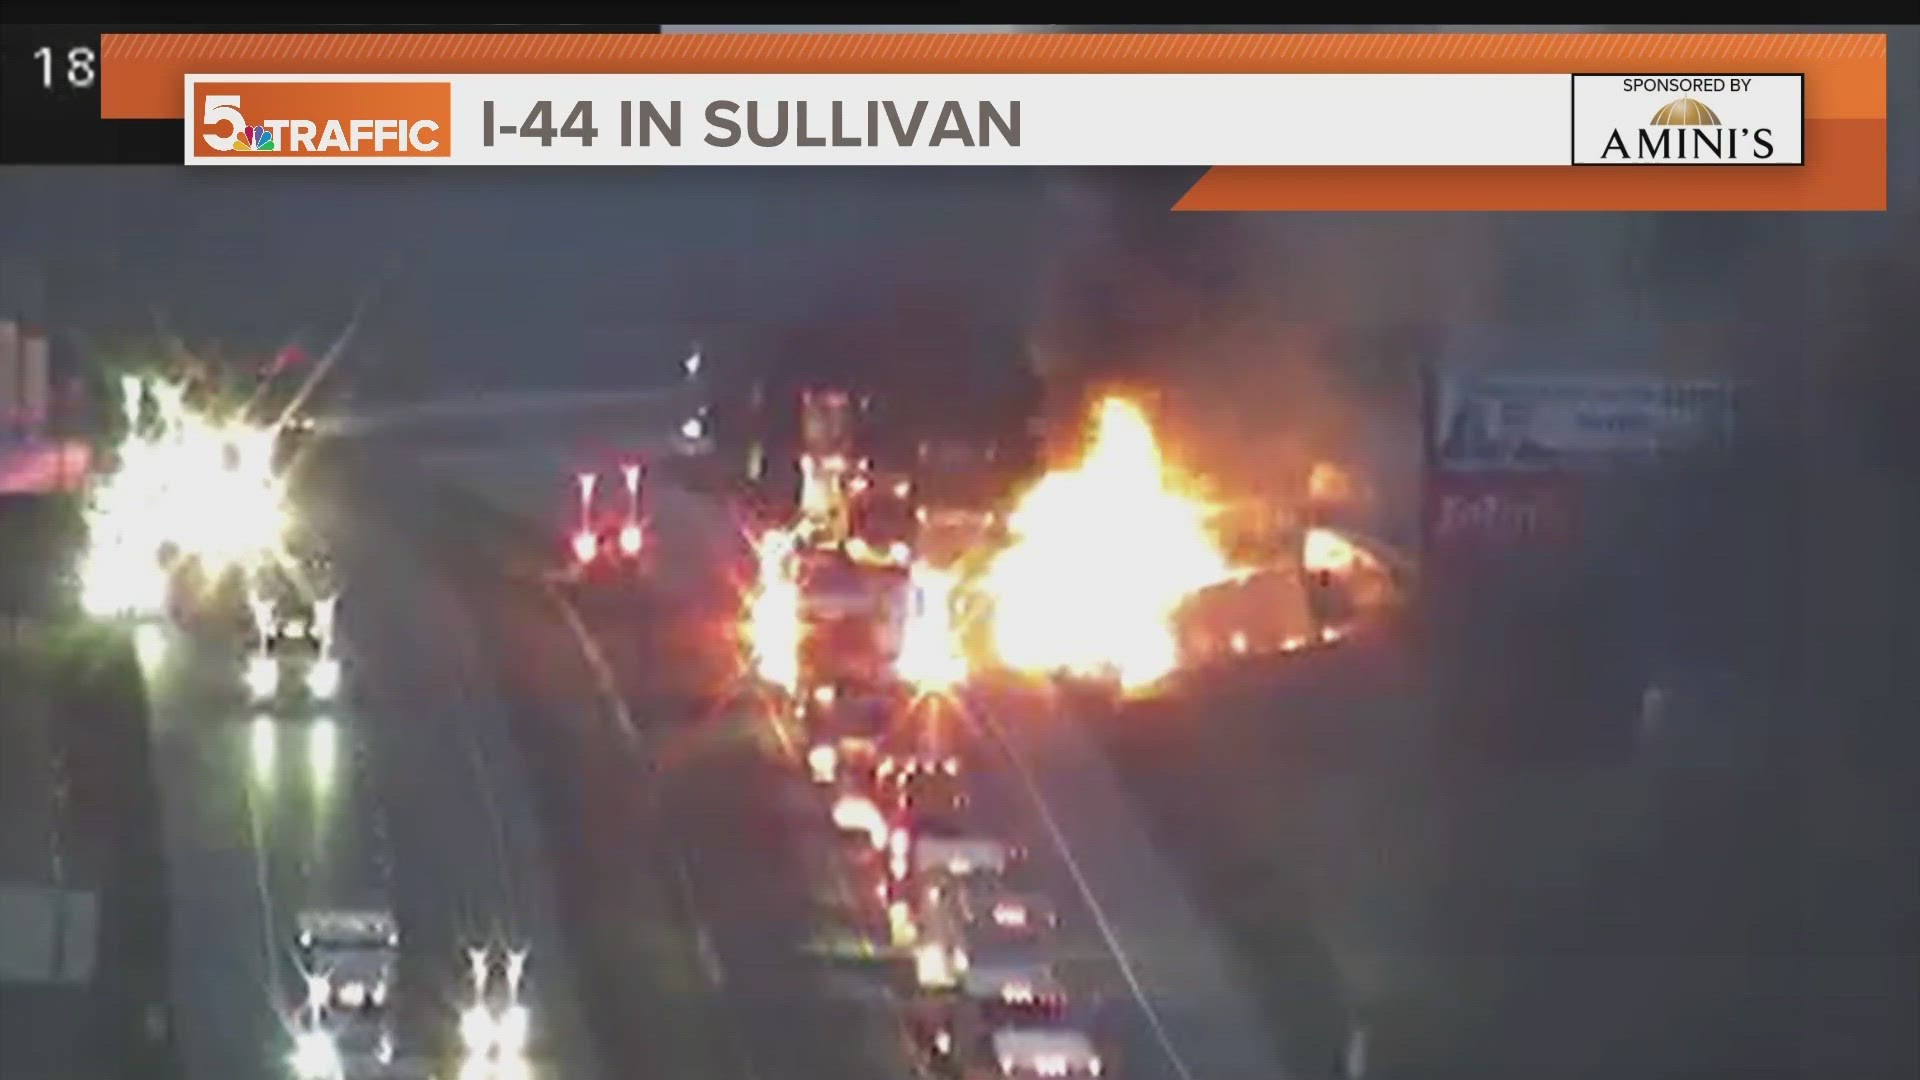 A semitruck fire on Interstate 44 in Sullivan, Missouri, is causing major delays for the morning commute. We're working to learn more.